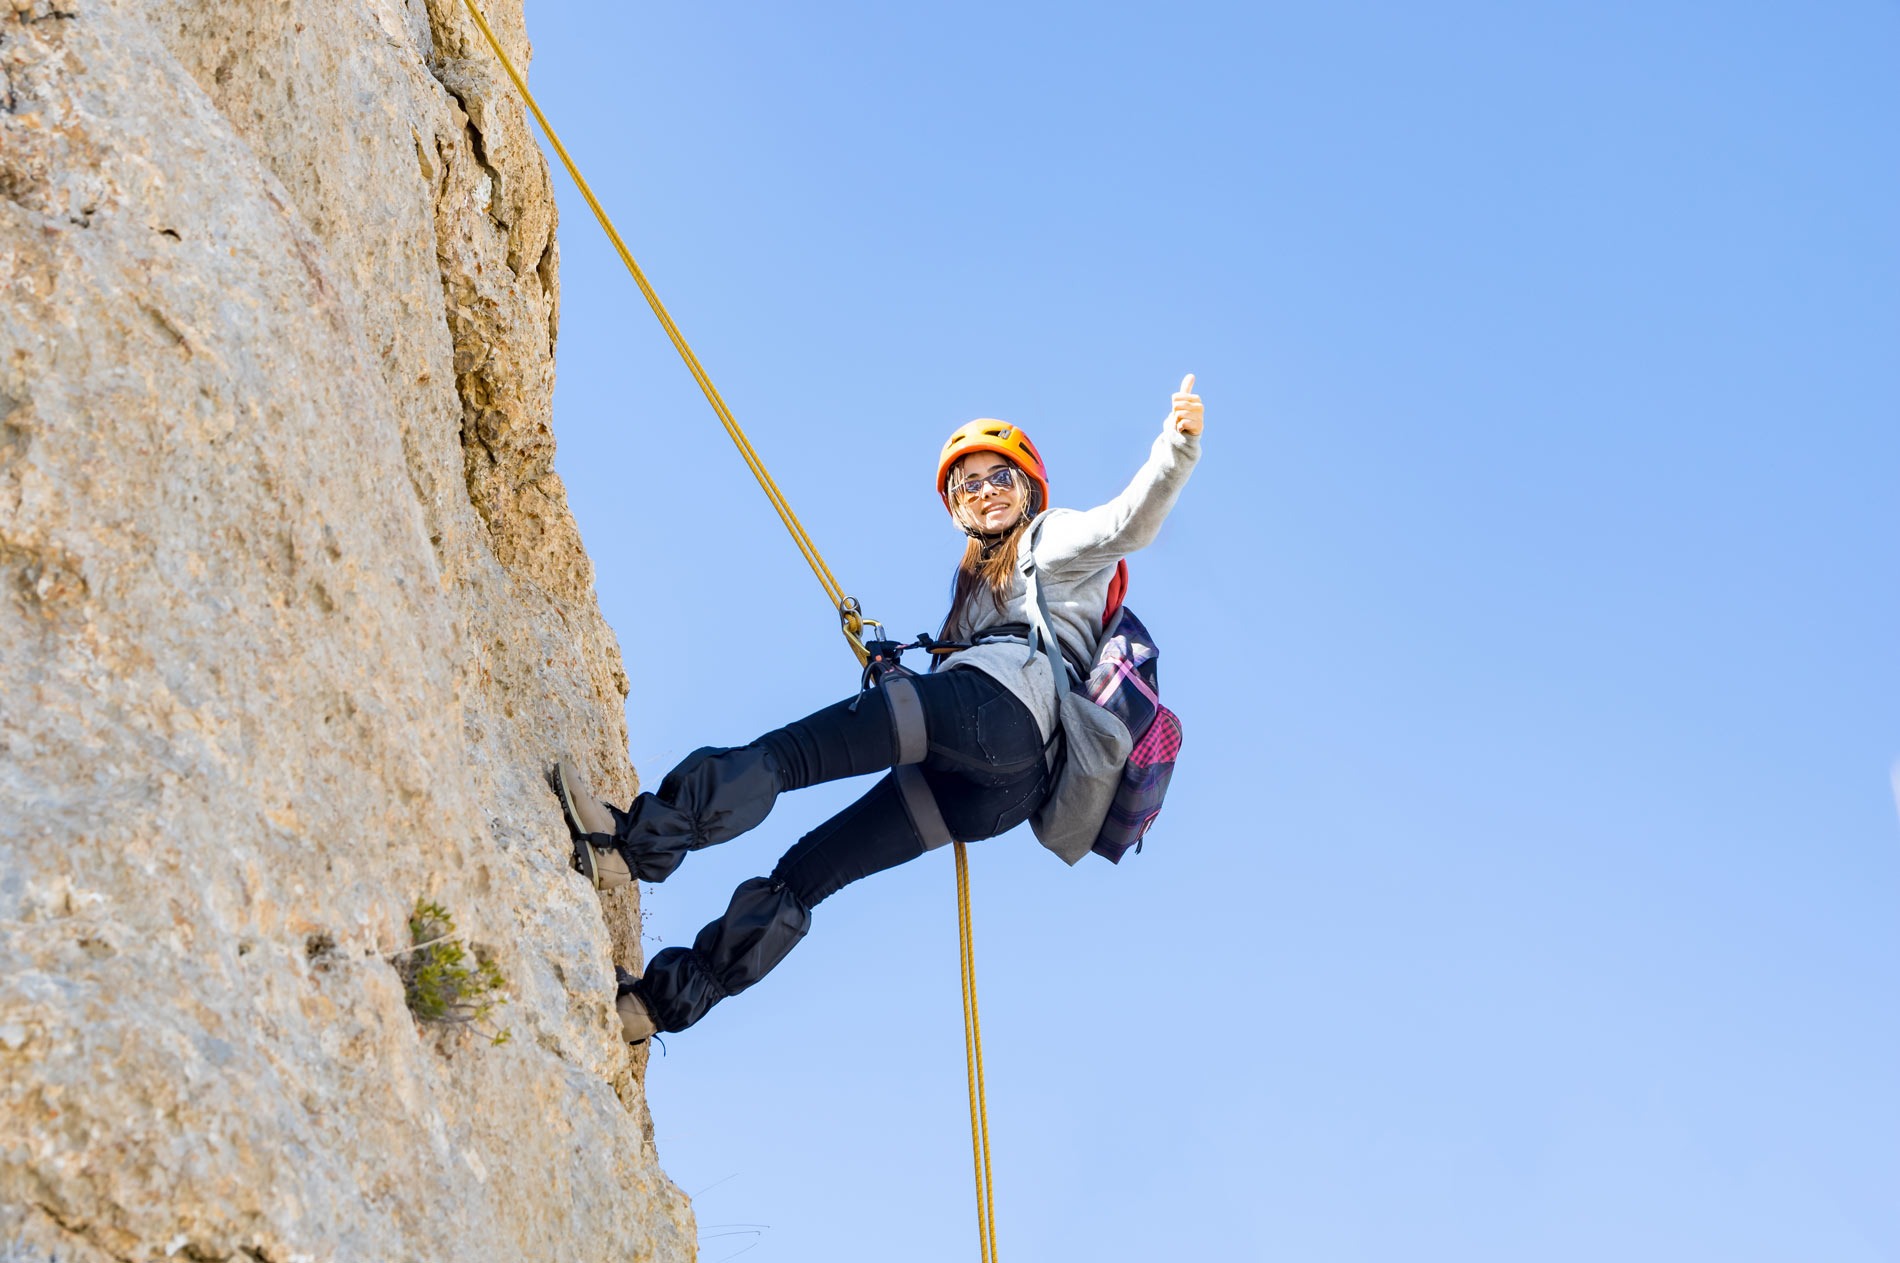 Take the plunge and abseil down the Cow and Calf to raise money for Martin House